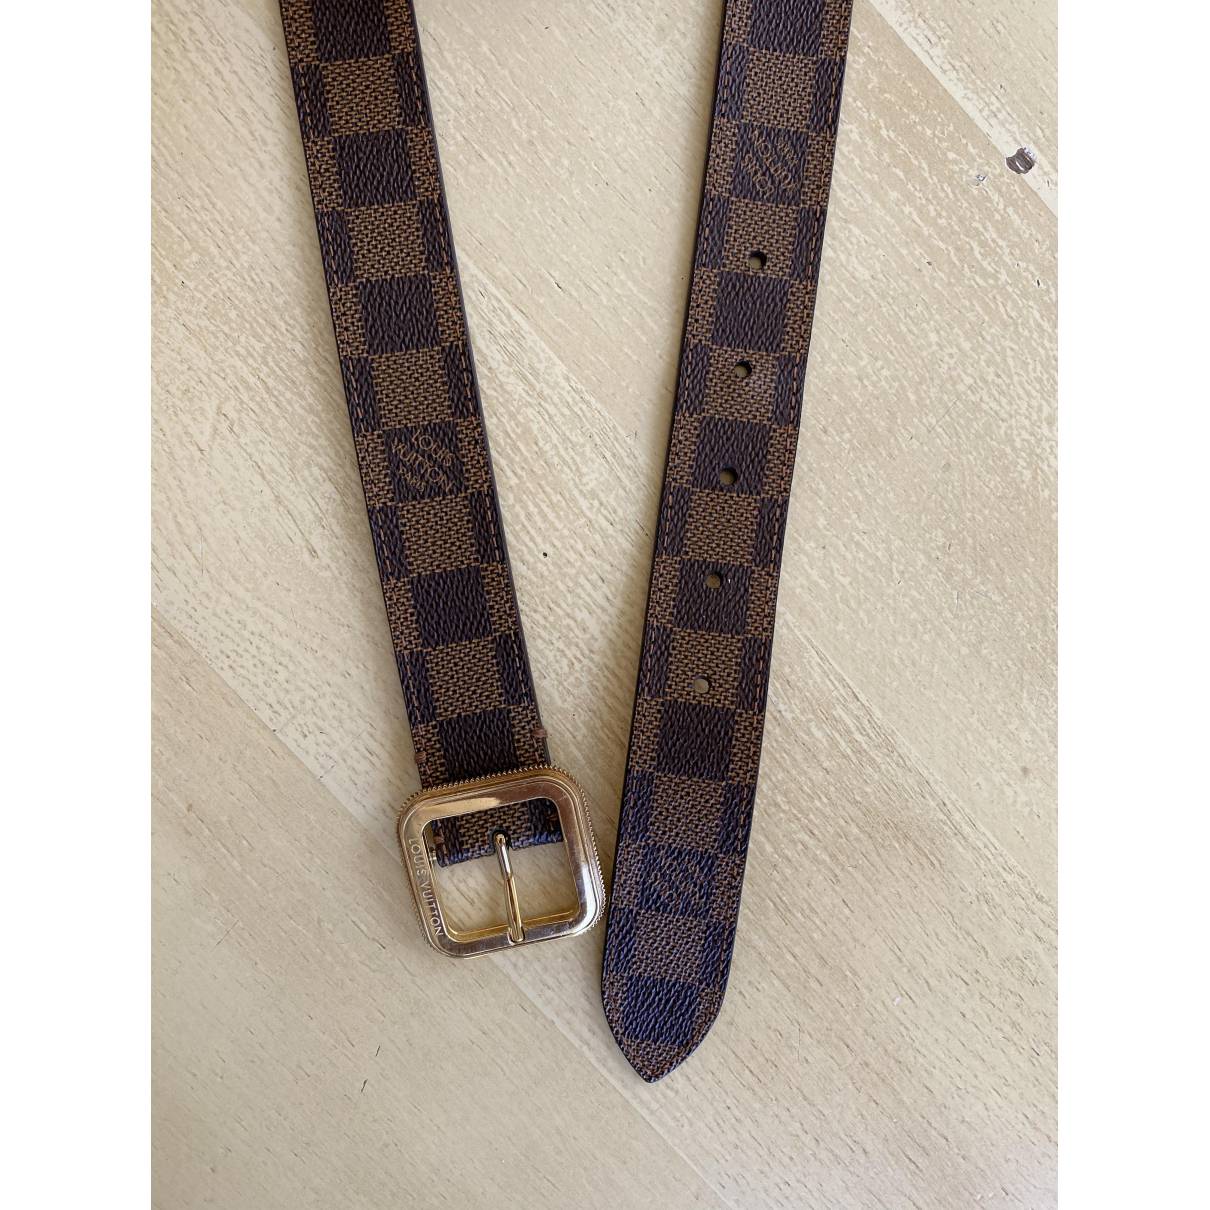 Louis Vuitton - Authenticated Belt - Cloth Brown for Women, Good Condition